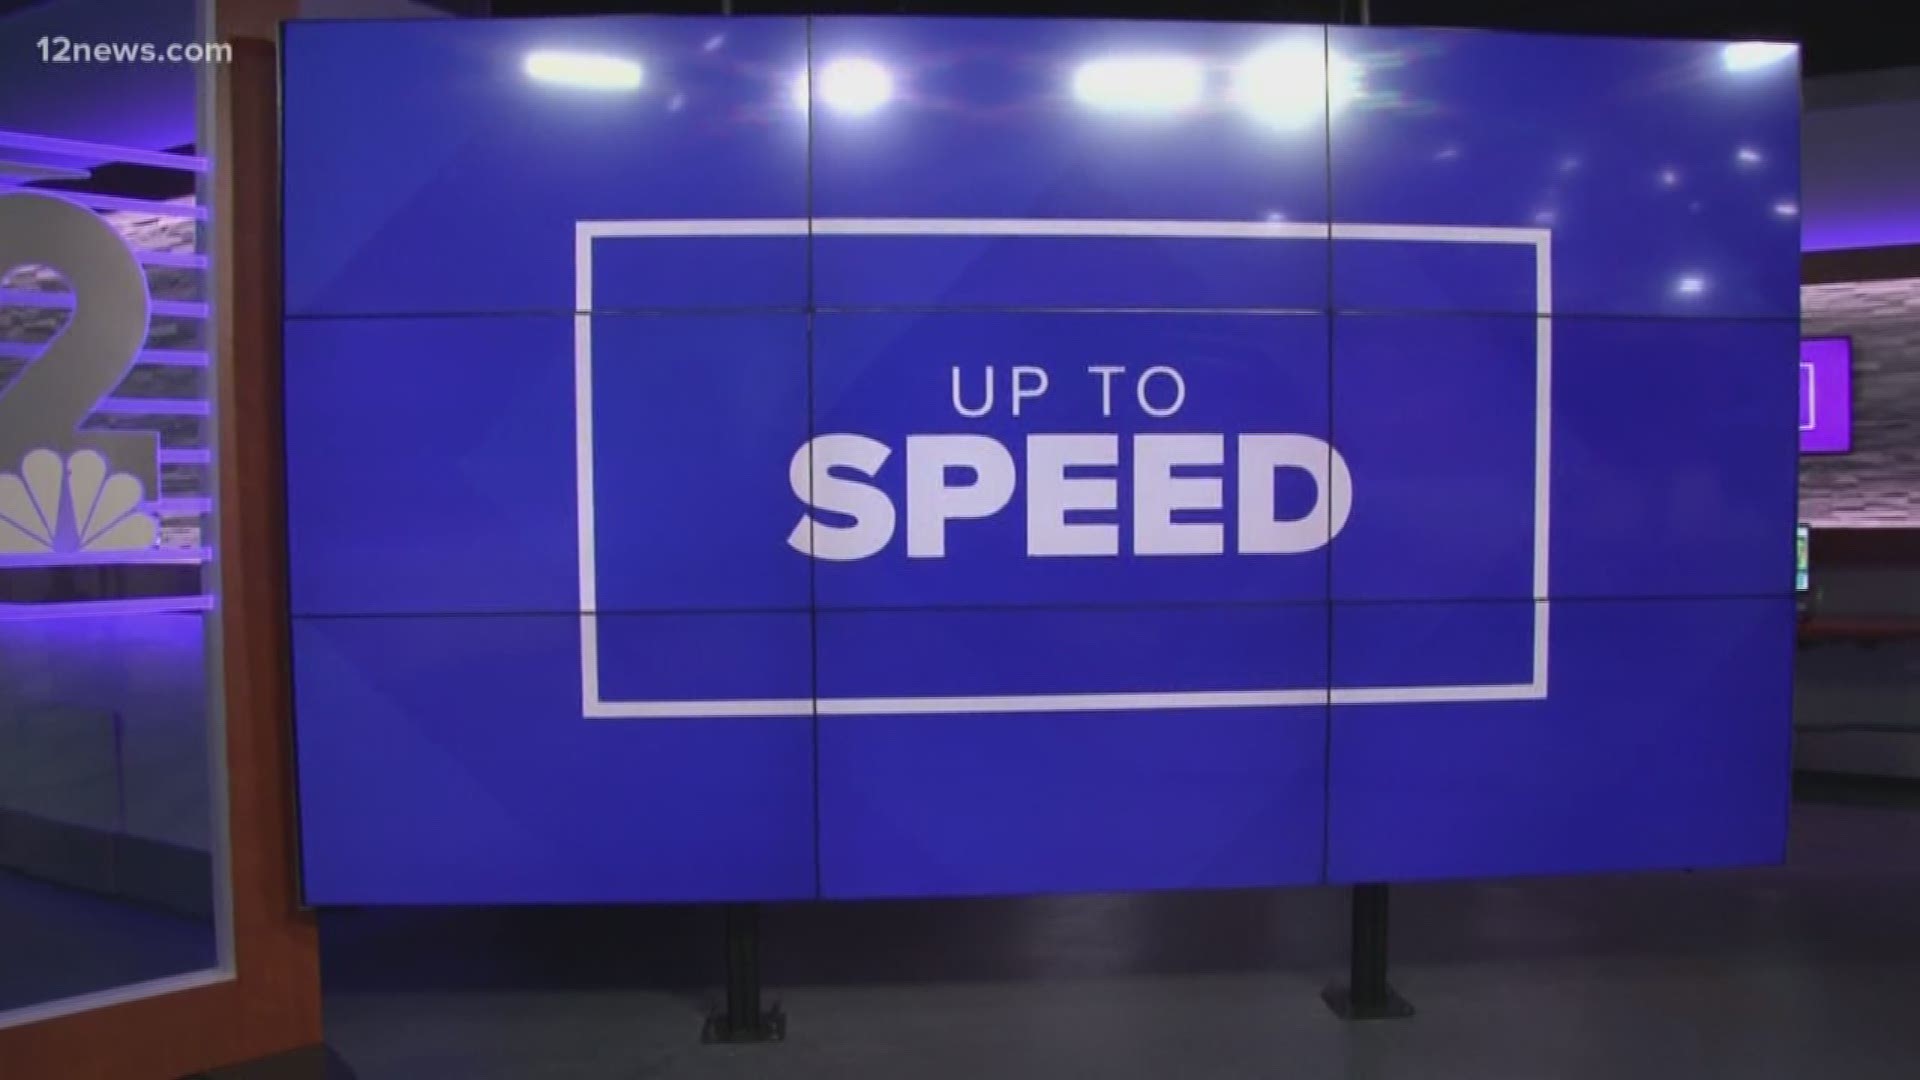 We get you "Up to Speed" with today's top headline in and around the Valley. From a Mesa child abuse sentenced to a hazardous materials fire scare, 12 News fills you in on what's going on.